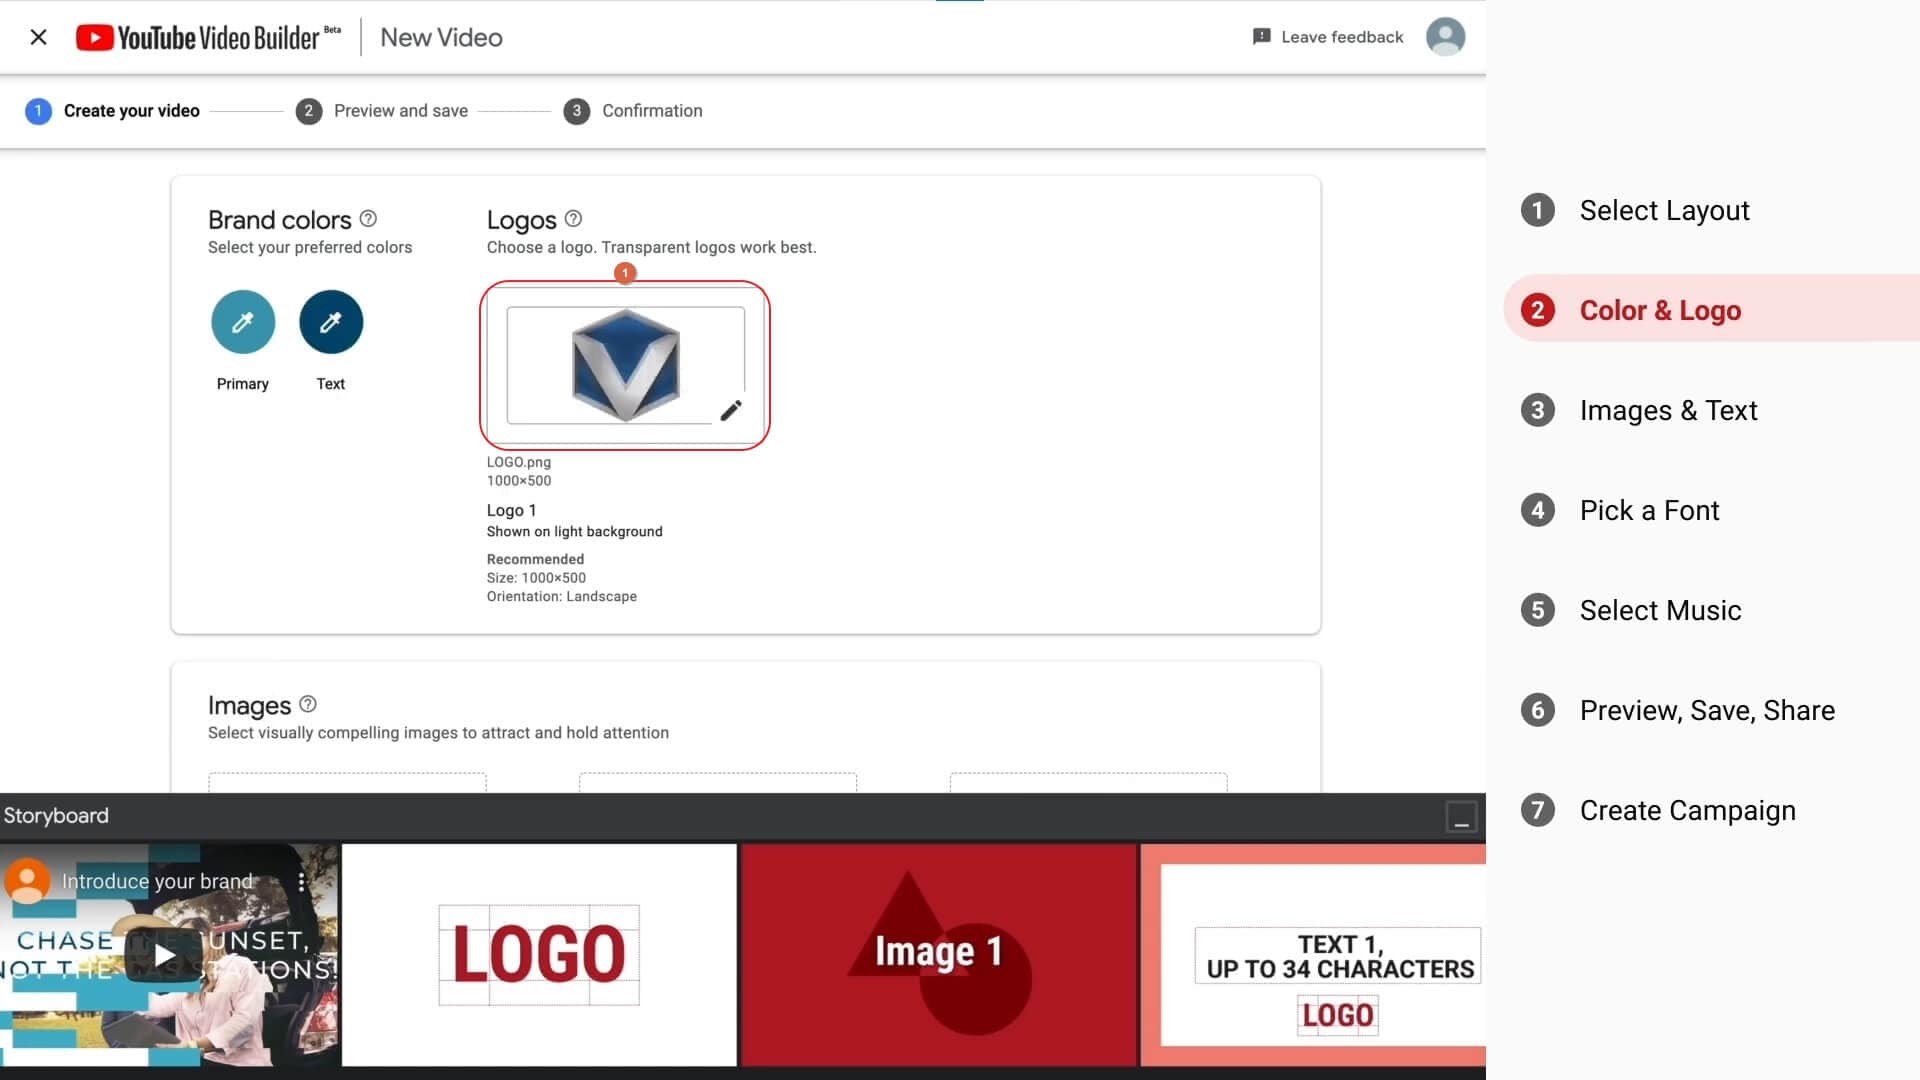 Create video with YouTube Video Builder 